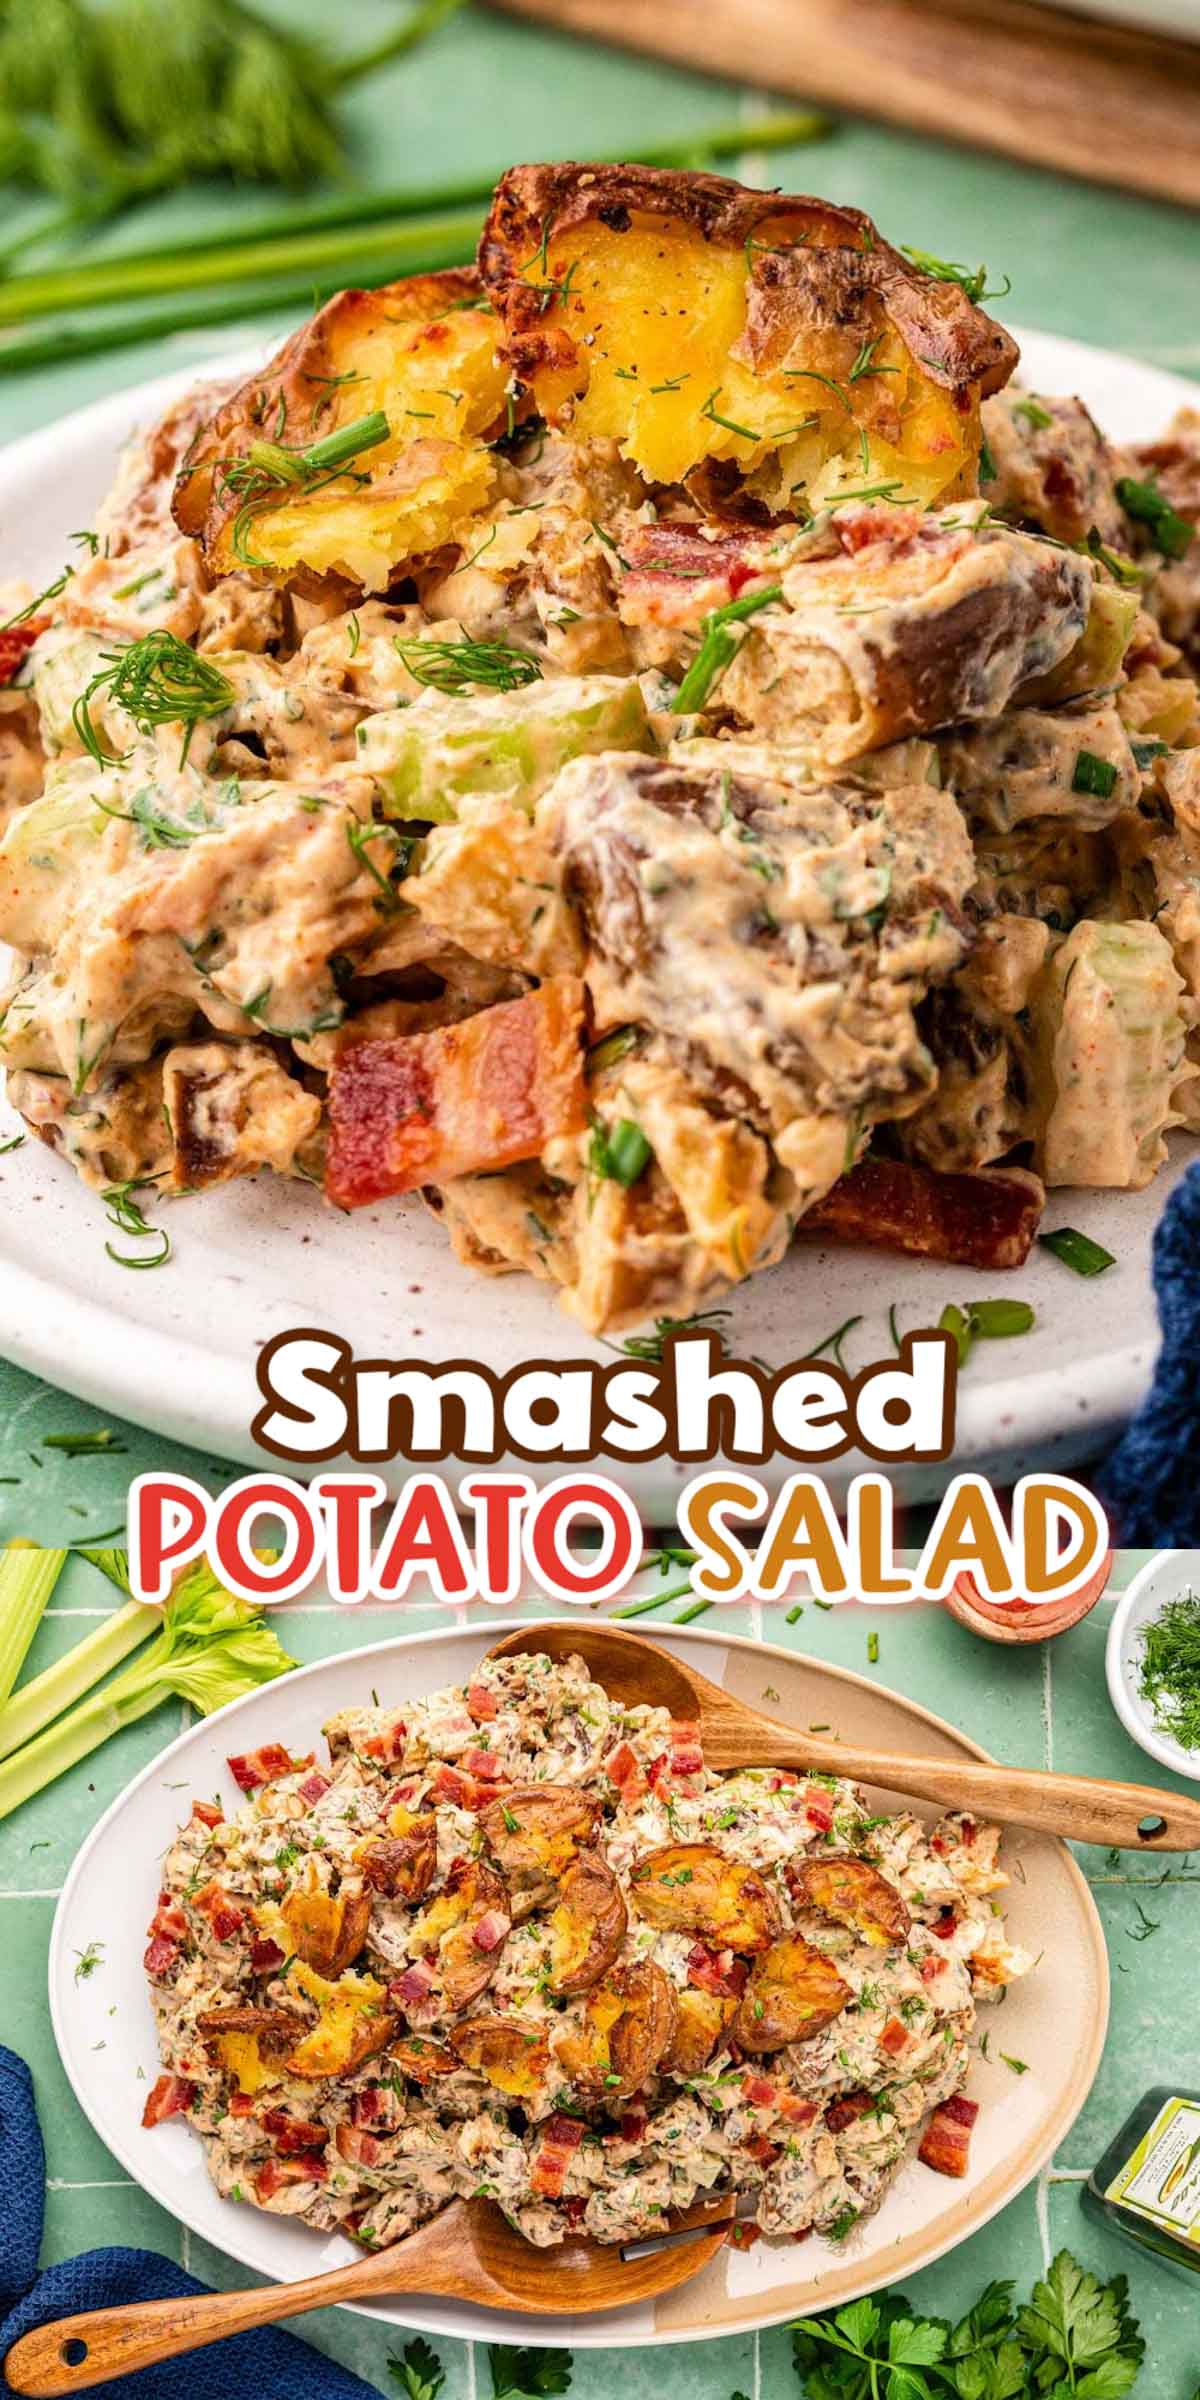 This Smashed Potatoes Salad has gone viral on TikTok for its crispy, crunchy texture and mouthwatering flavor! A go-to summer side dish packed with crispy smashed potatoes, salty bacon, crunchy celery, and a homemade dressing bursting with fresh flavor! via @sugarandsoulco